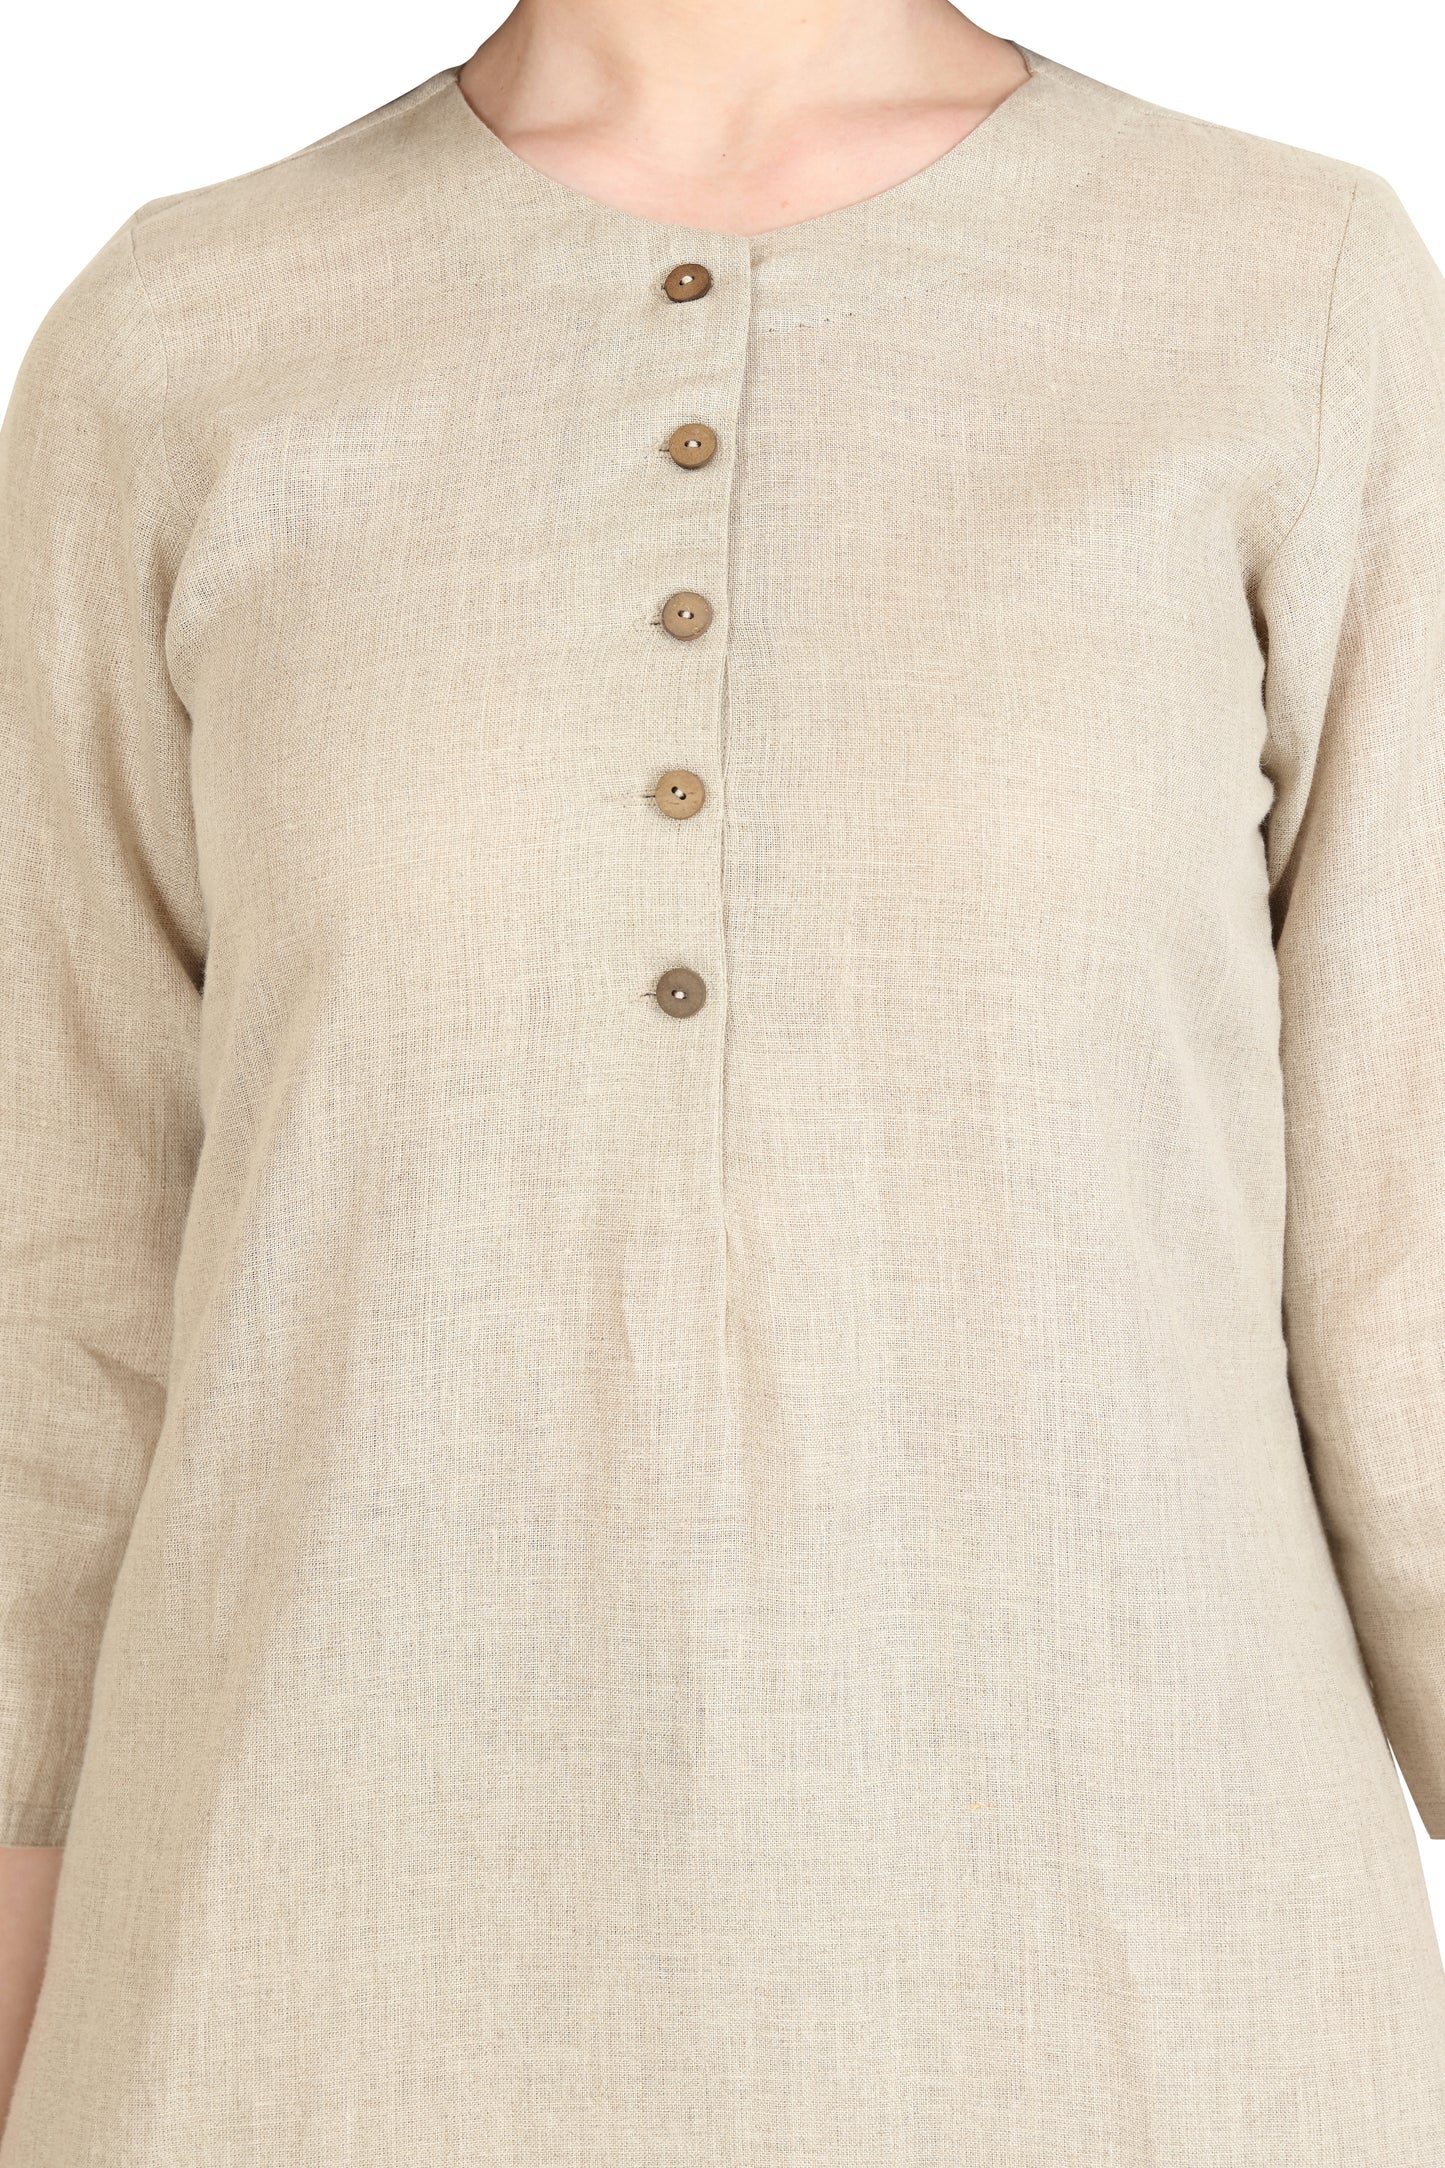 Linen and Linens - Beige Dipped Tunic - 5